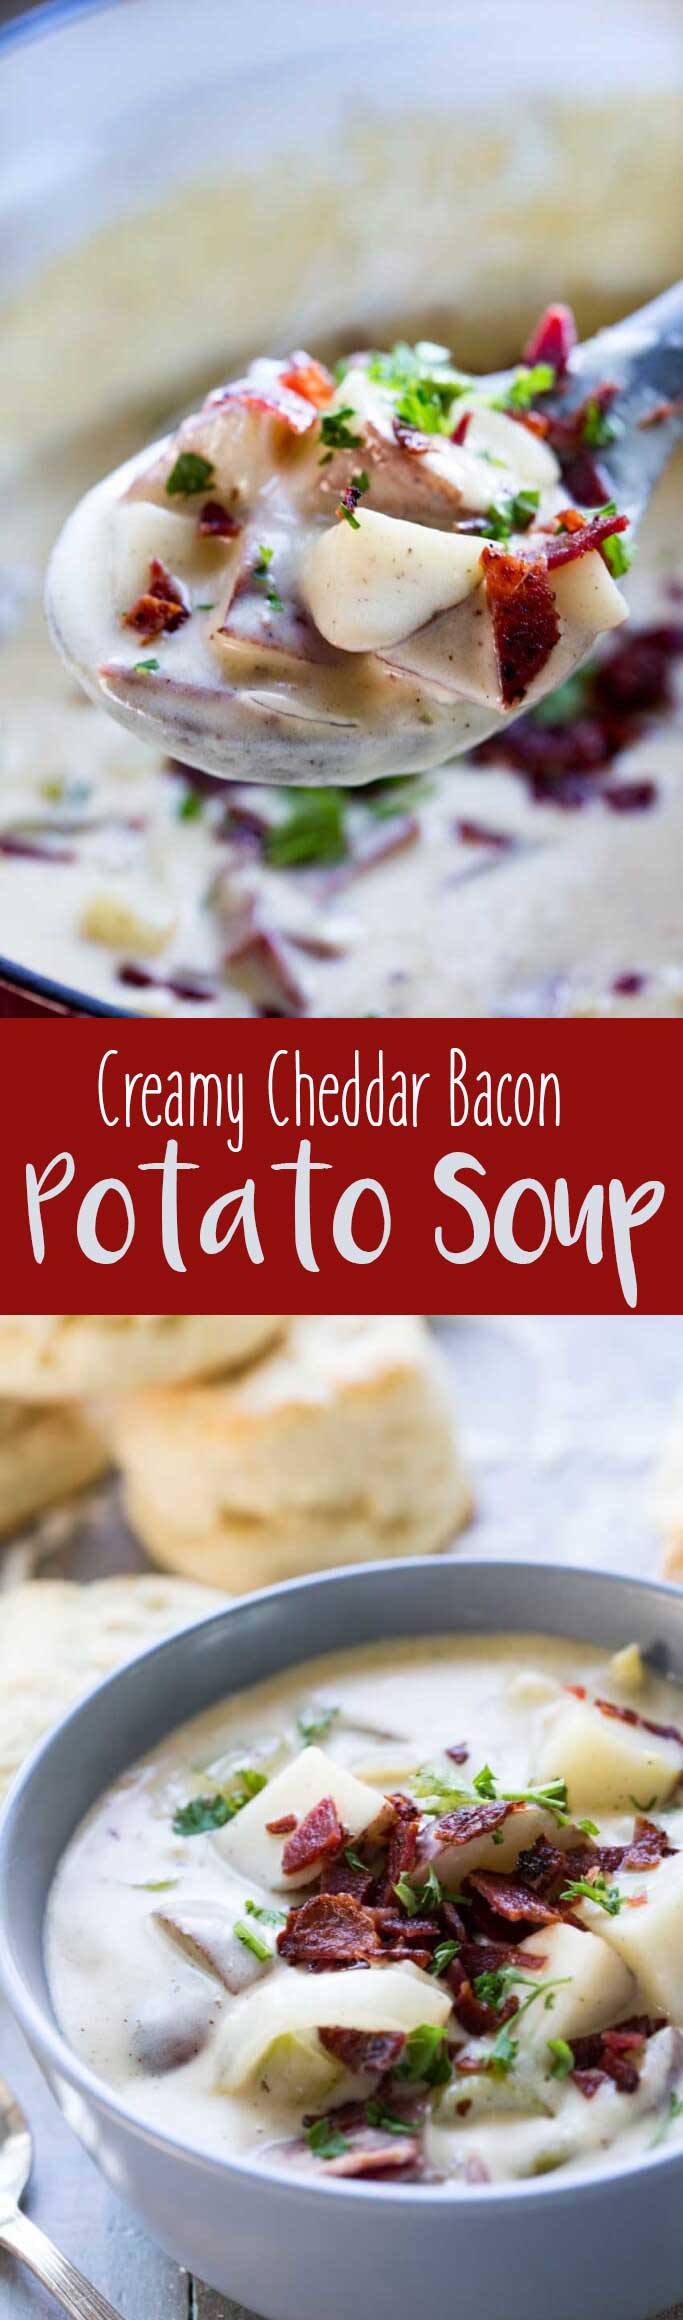 Creamy Cheddar Bacon Potato Soup is perfect for chilly Fall weather. #ad #VoteWrightBrandBacon